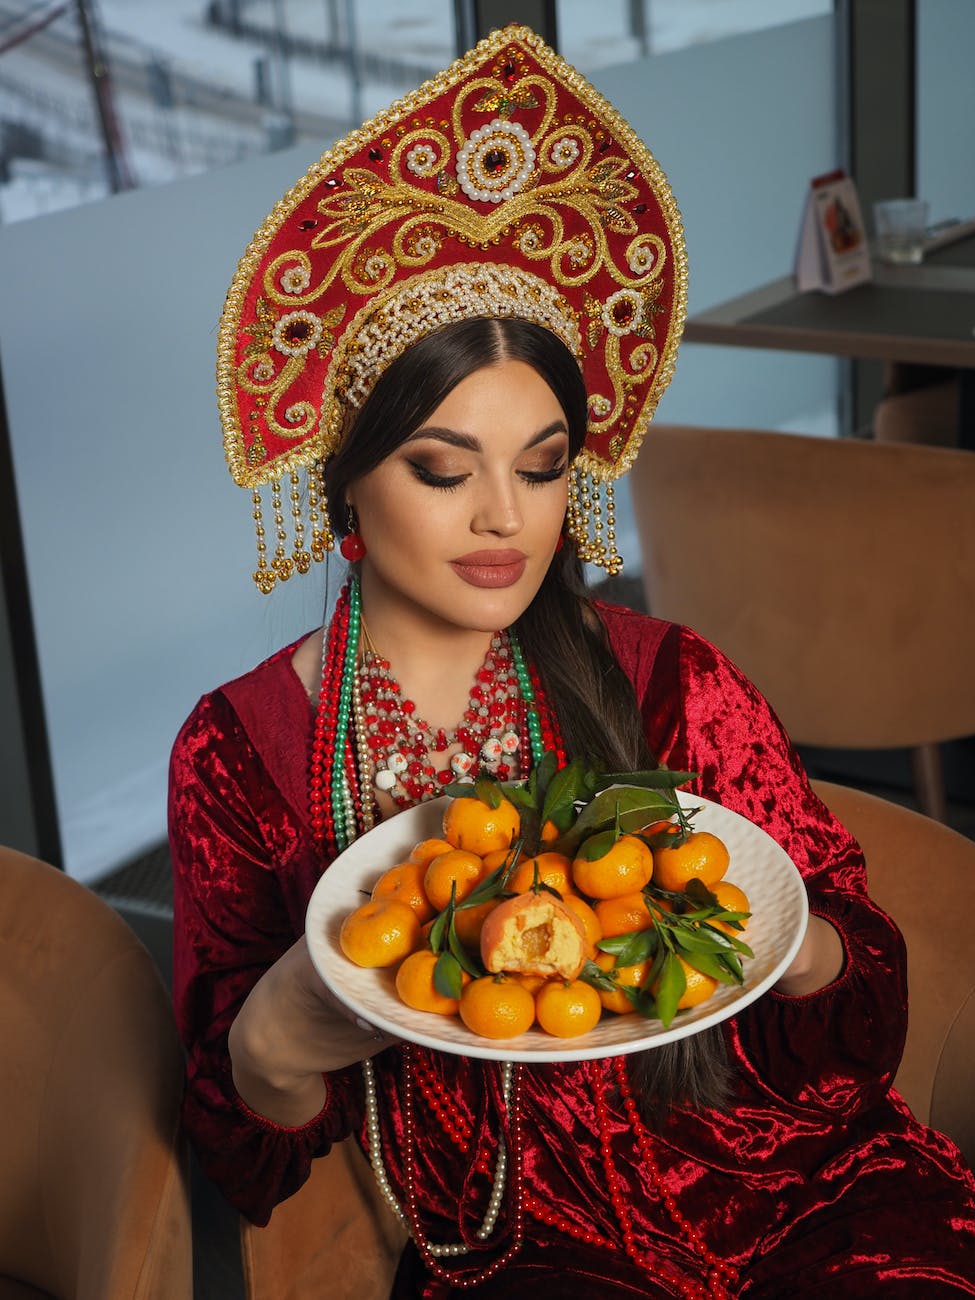 woman wearing ornamental hat and red velvet dress holding plate with tangerines